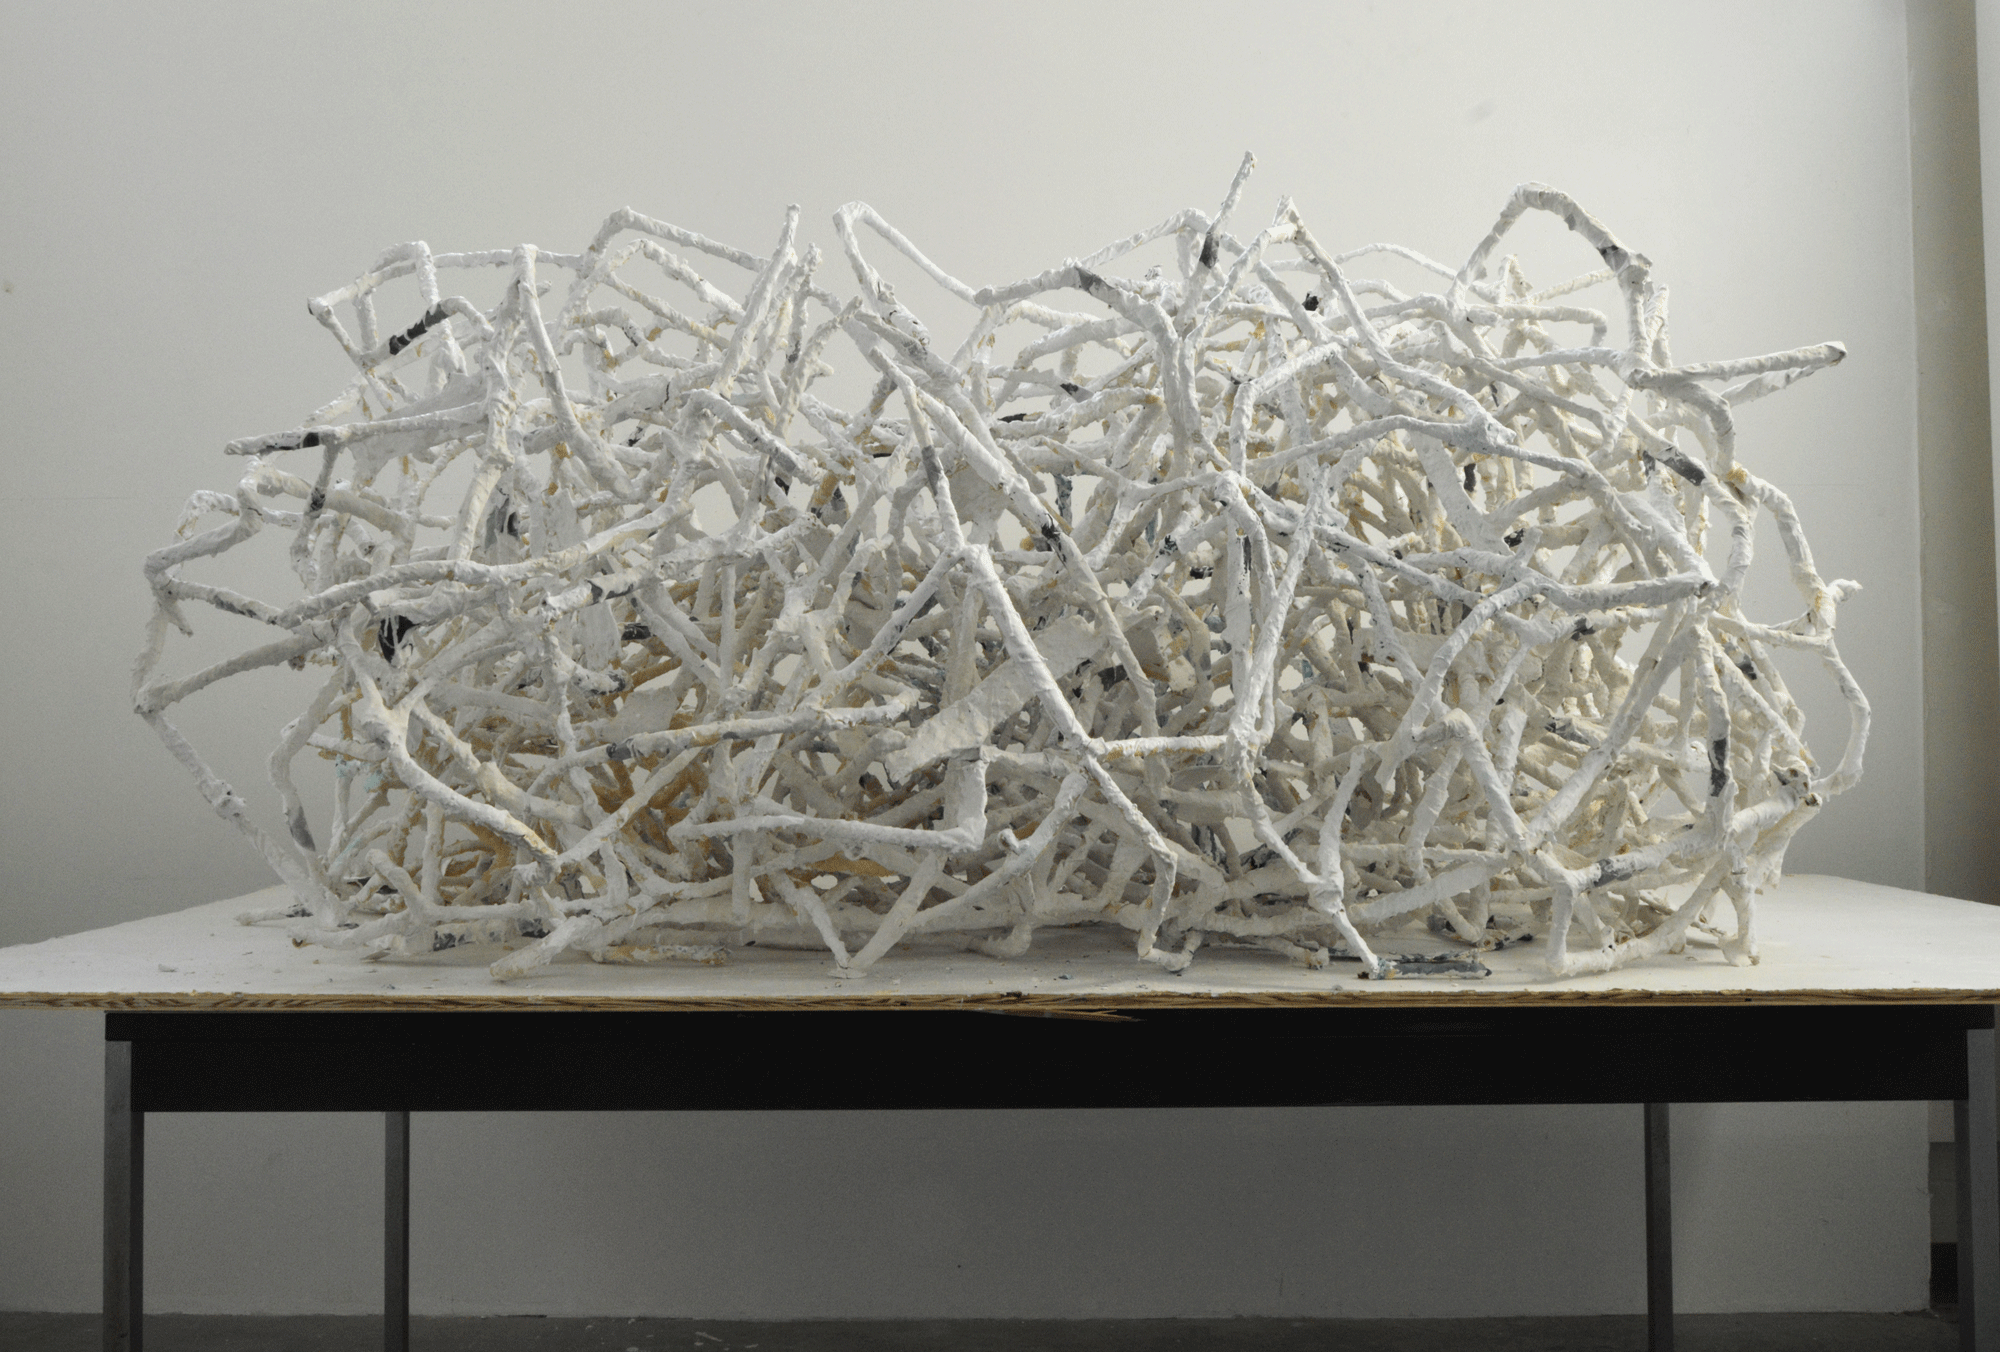  Untitled, (Large White Tangle), 3 x 4 x 6 ft. Plaster, Paper, Glue, Canvas, Paint, Birch, 2019 